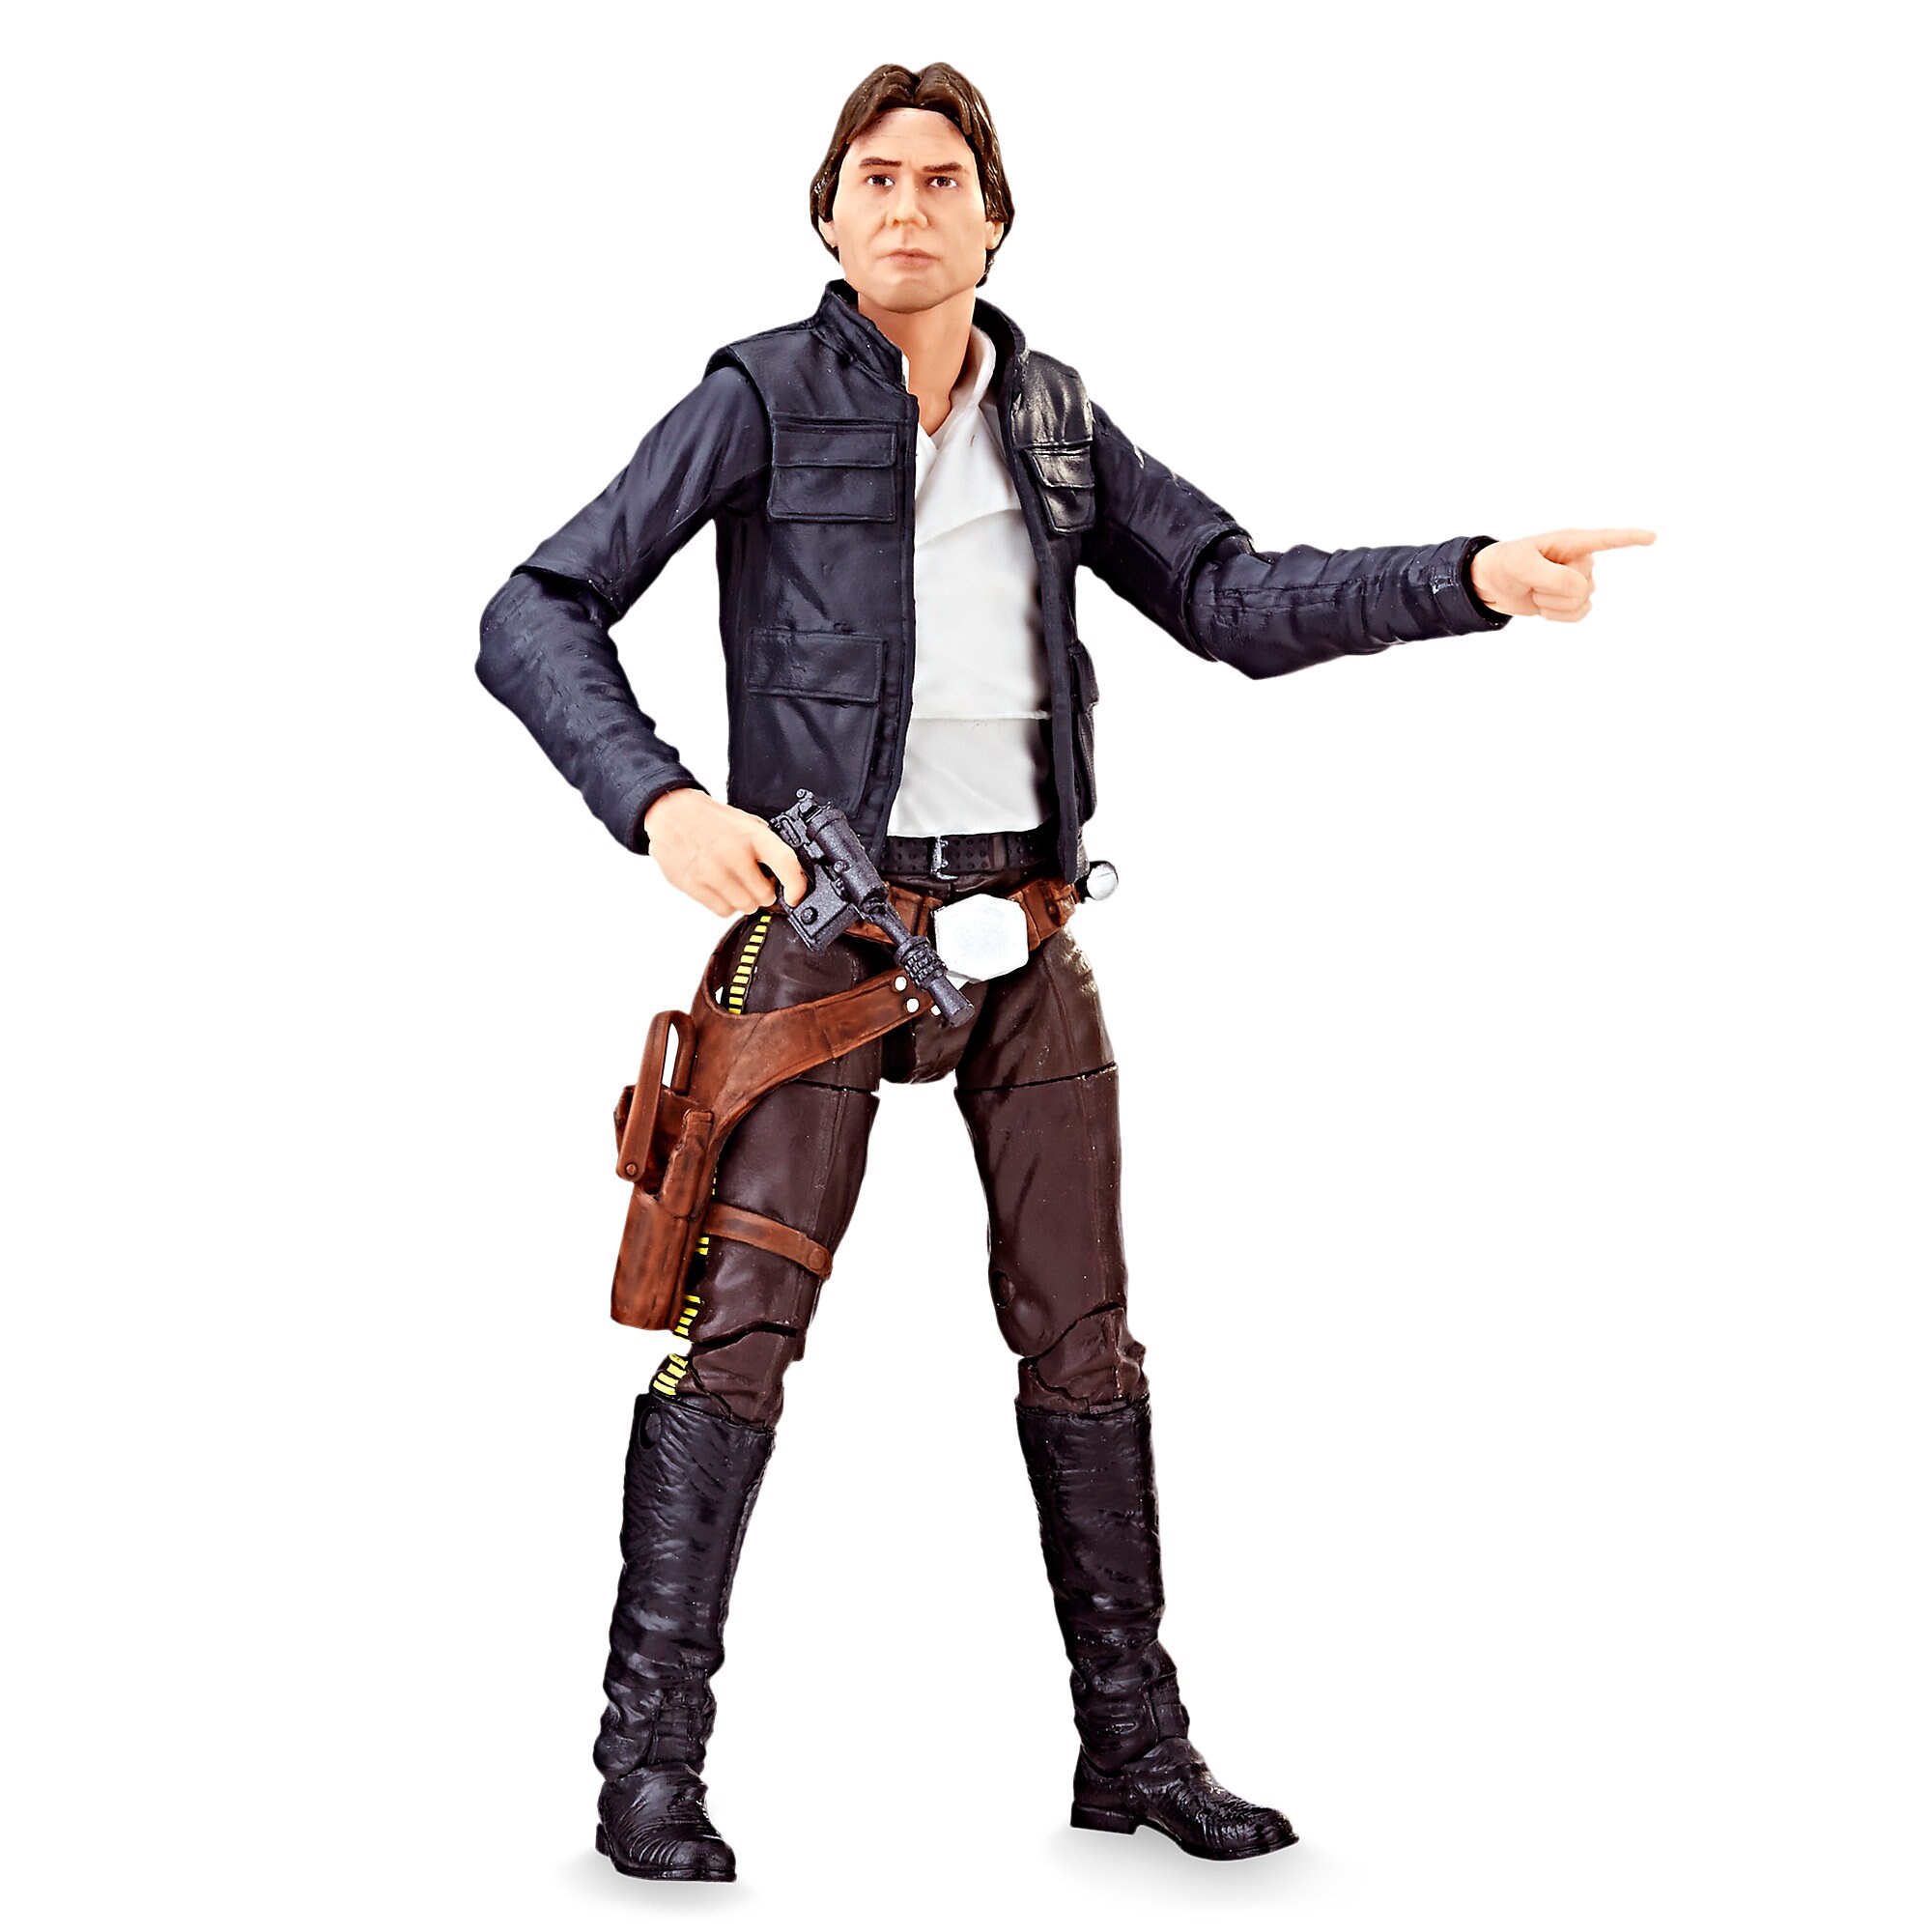 Han Solo Action Figure - Star Wars: The Empire Strikes Back - The Black Series by Hasbro